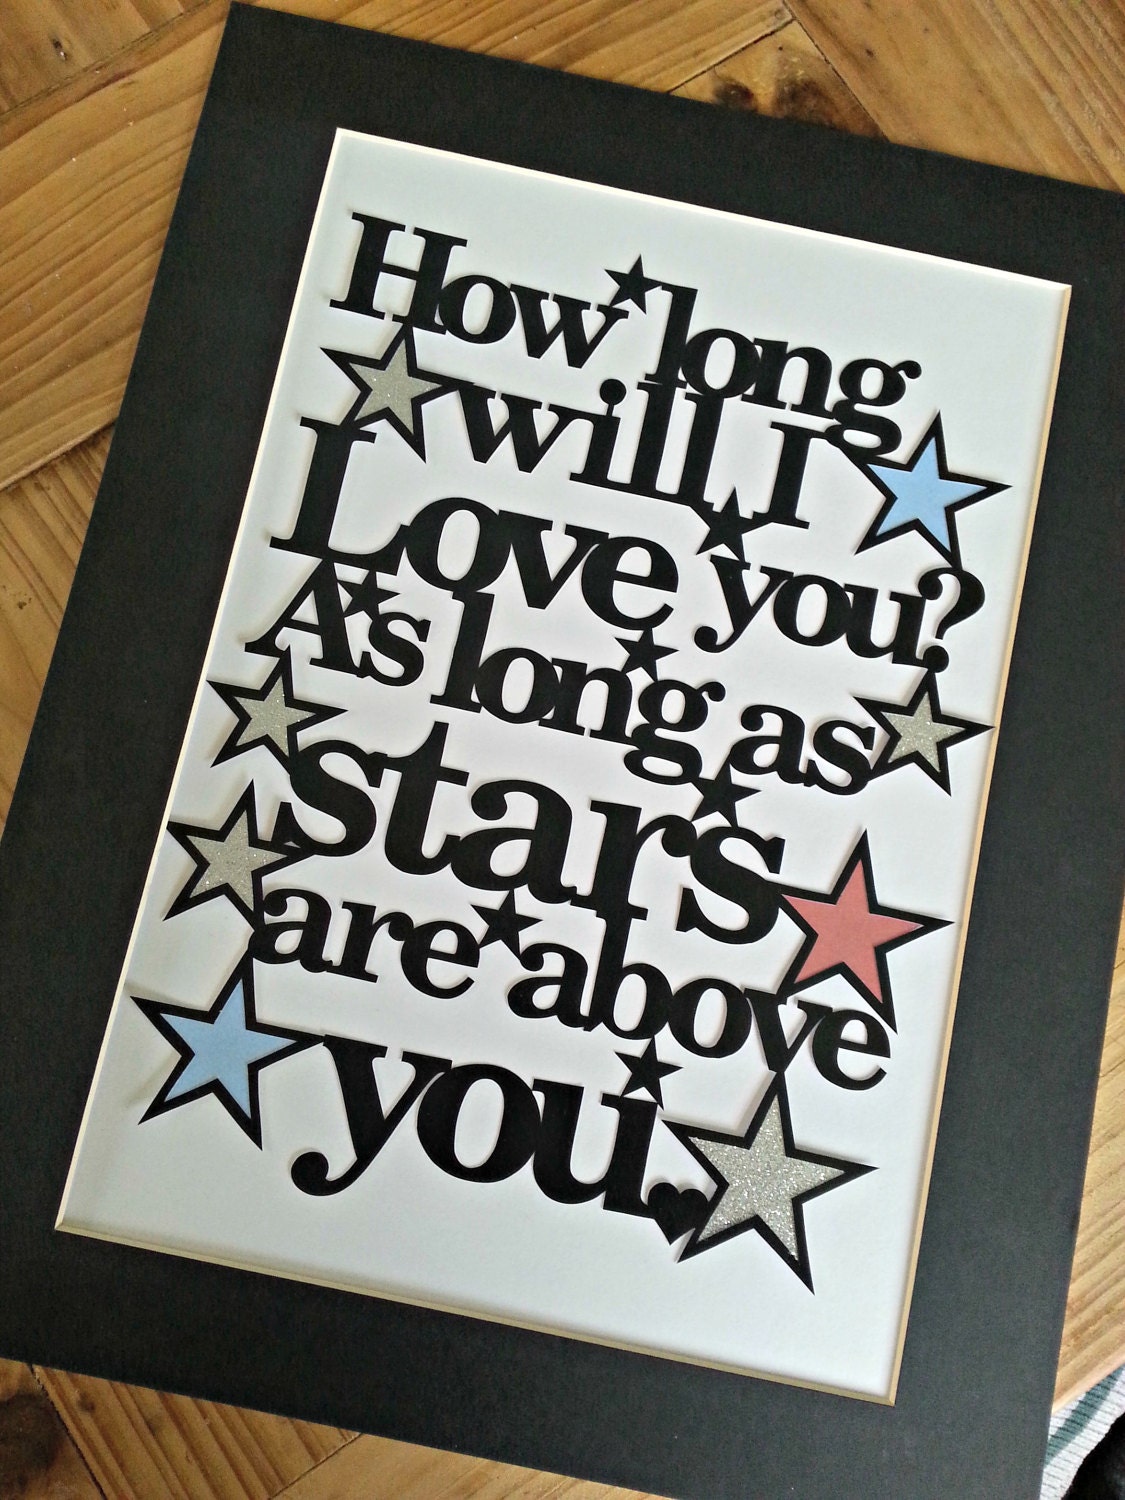 Papercut Template Cut your own papercutting How Long will I Love you As Long as stars are above you Love quote Inspirational Valentines t